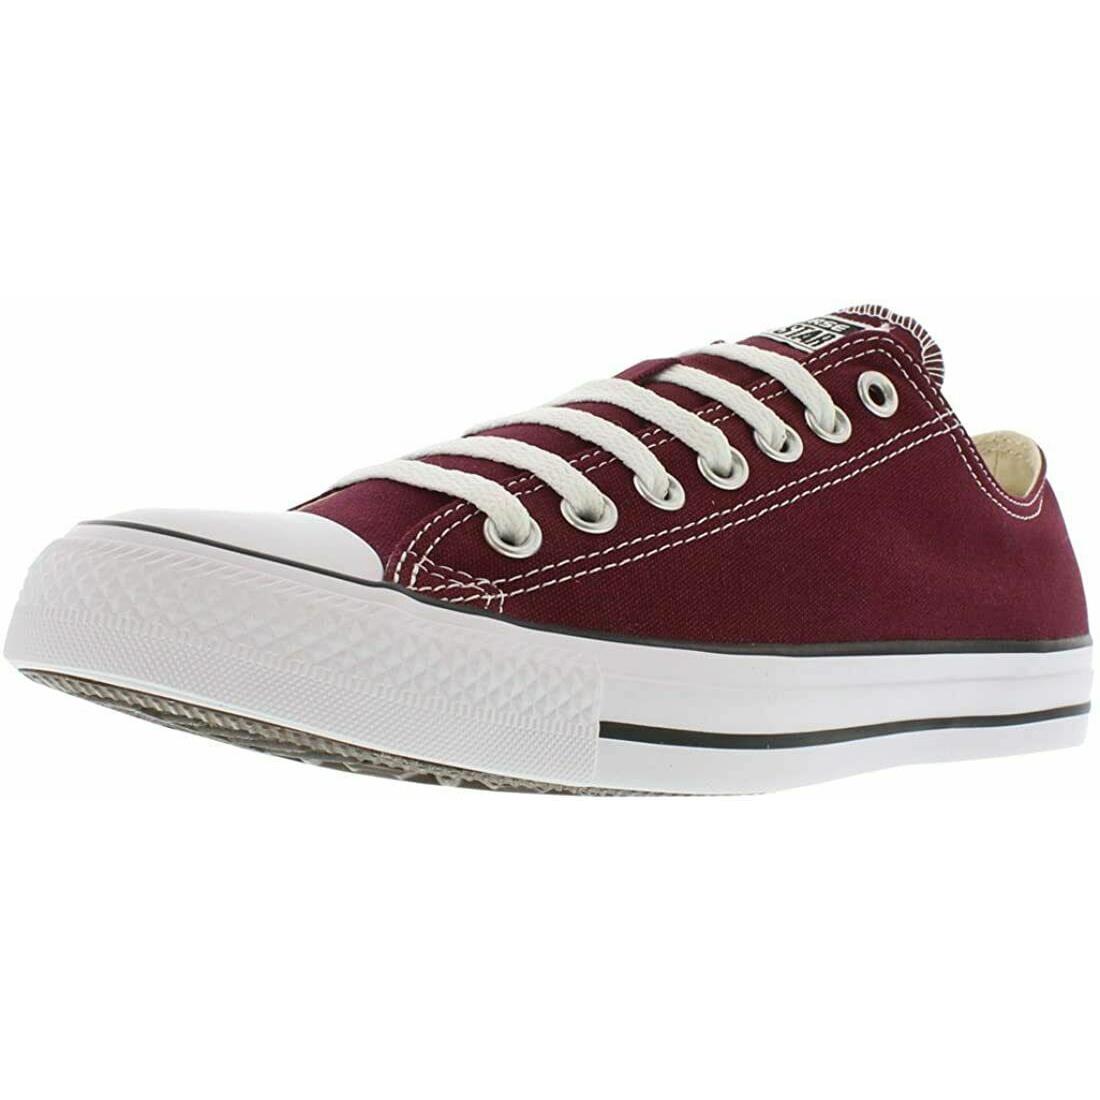 Converse Unisex All Star Chuck Taylor Low Top Athletic Shoes 4 Colors BURGANDY